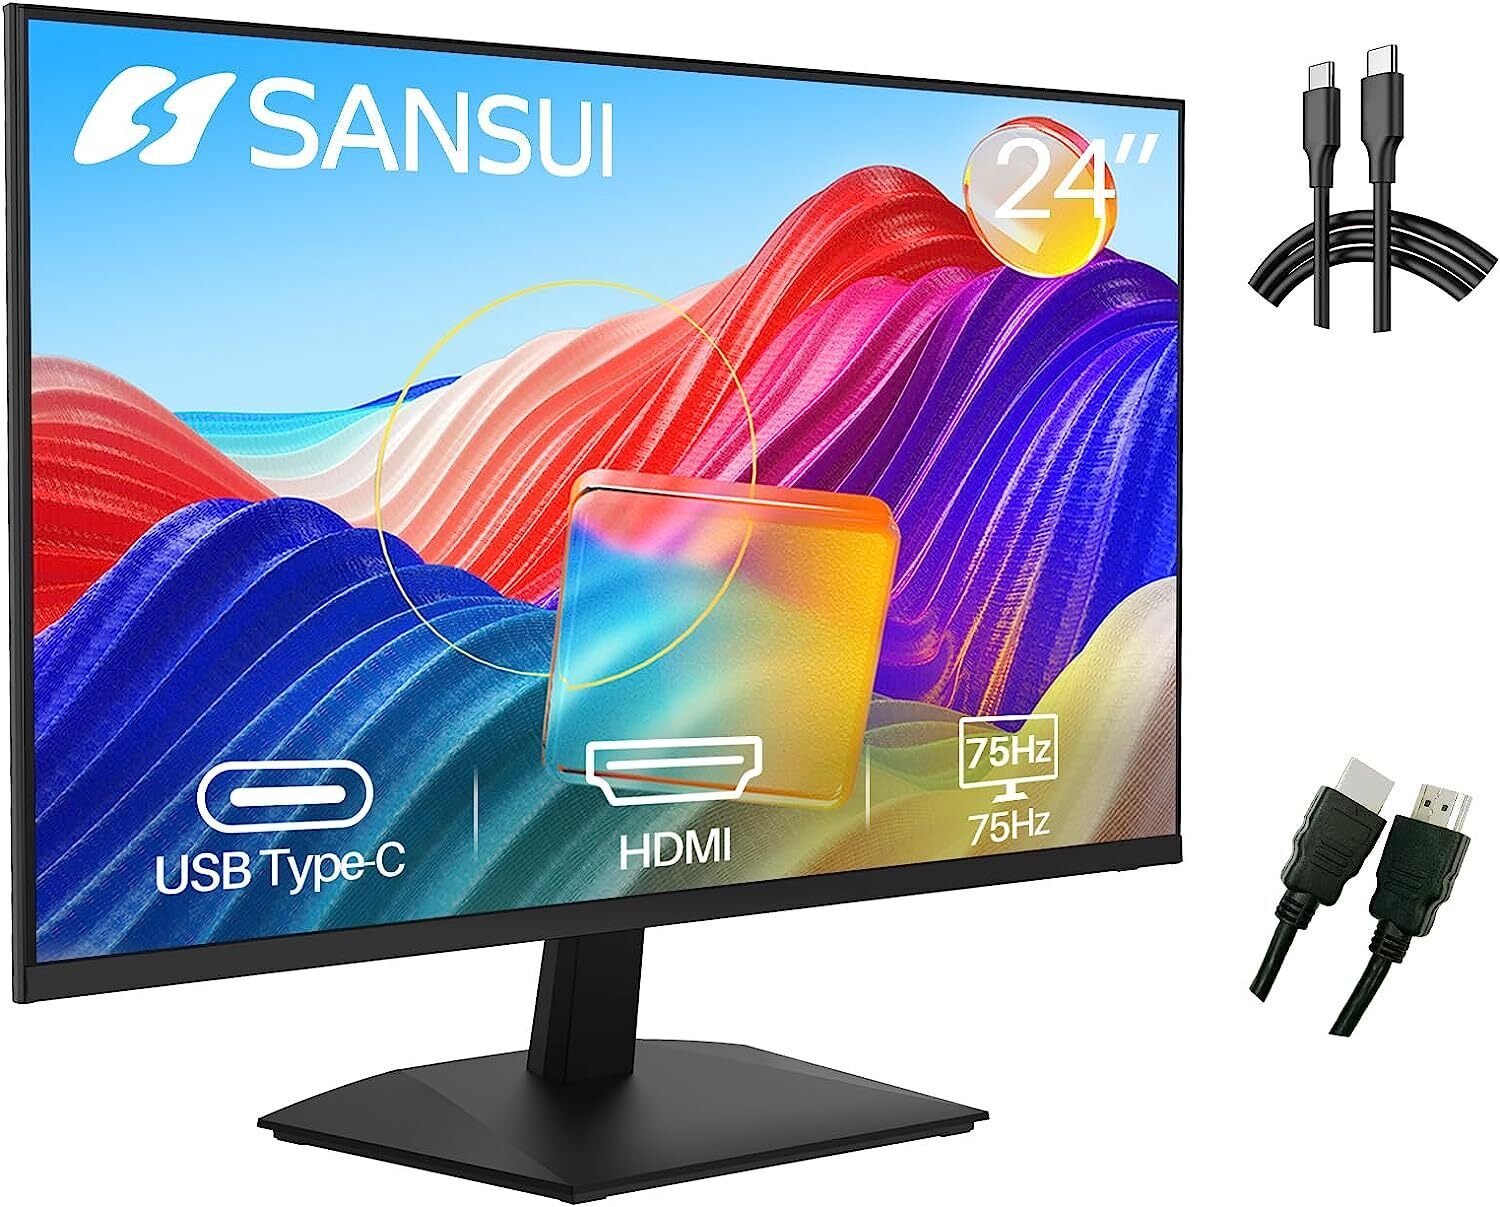 Sansui Monitor 24 inch FHD PC Monitor with USB Type-C,Built-in Speakers Earphone